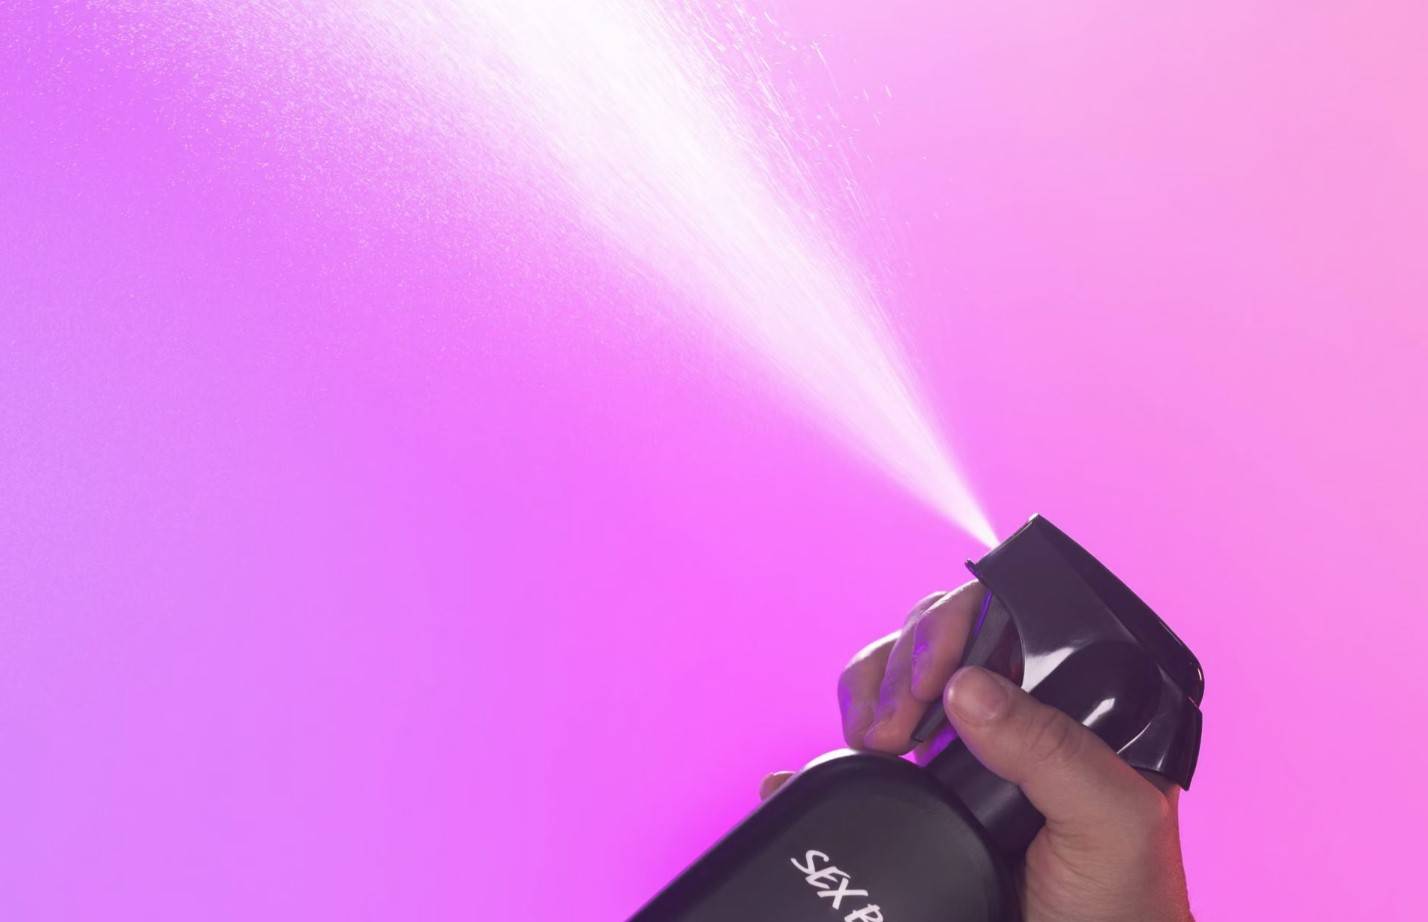 Sex Bomb body spray is being held and spritzed into the air on a purple and pink background.